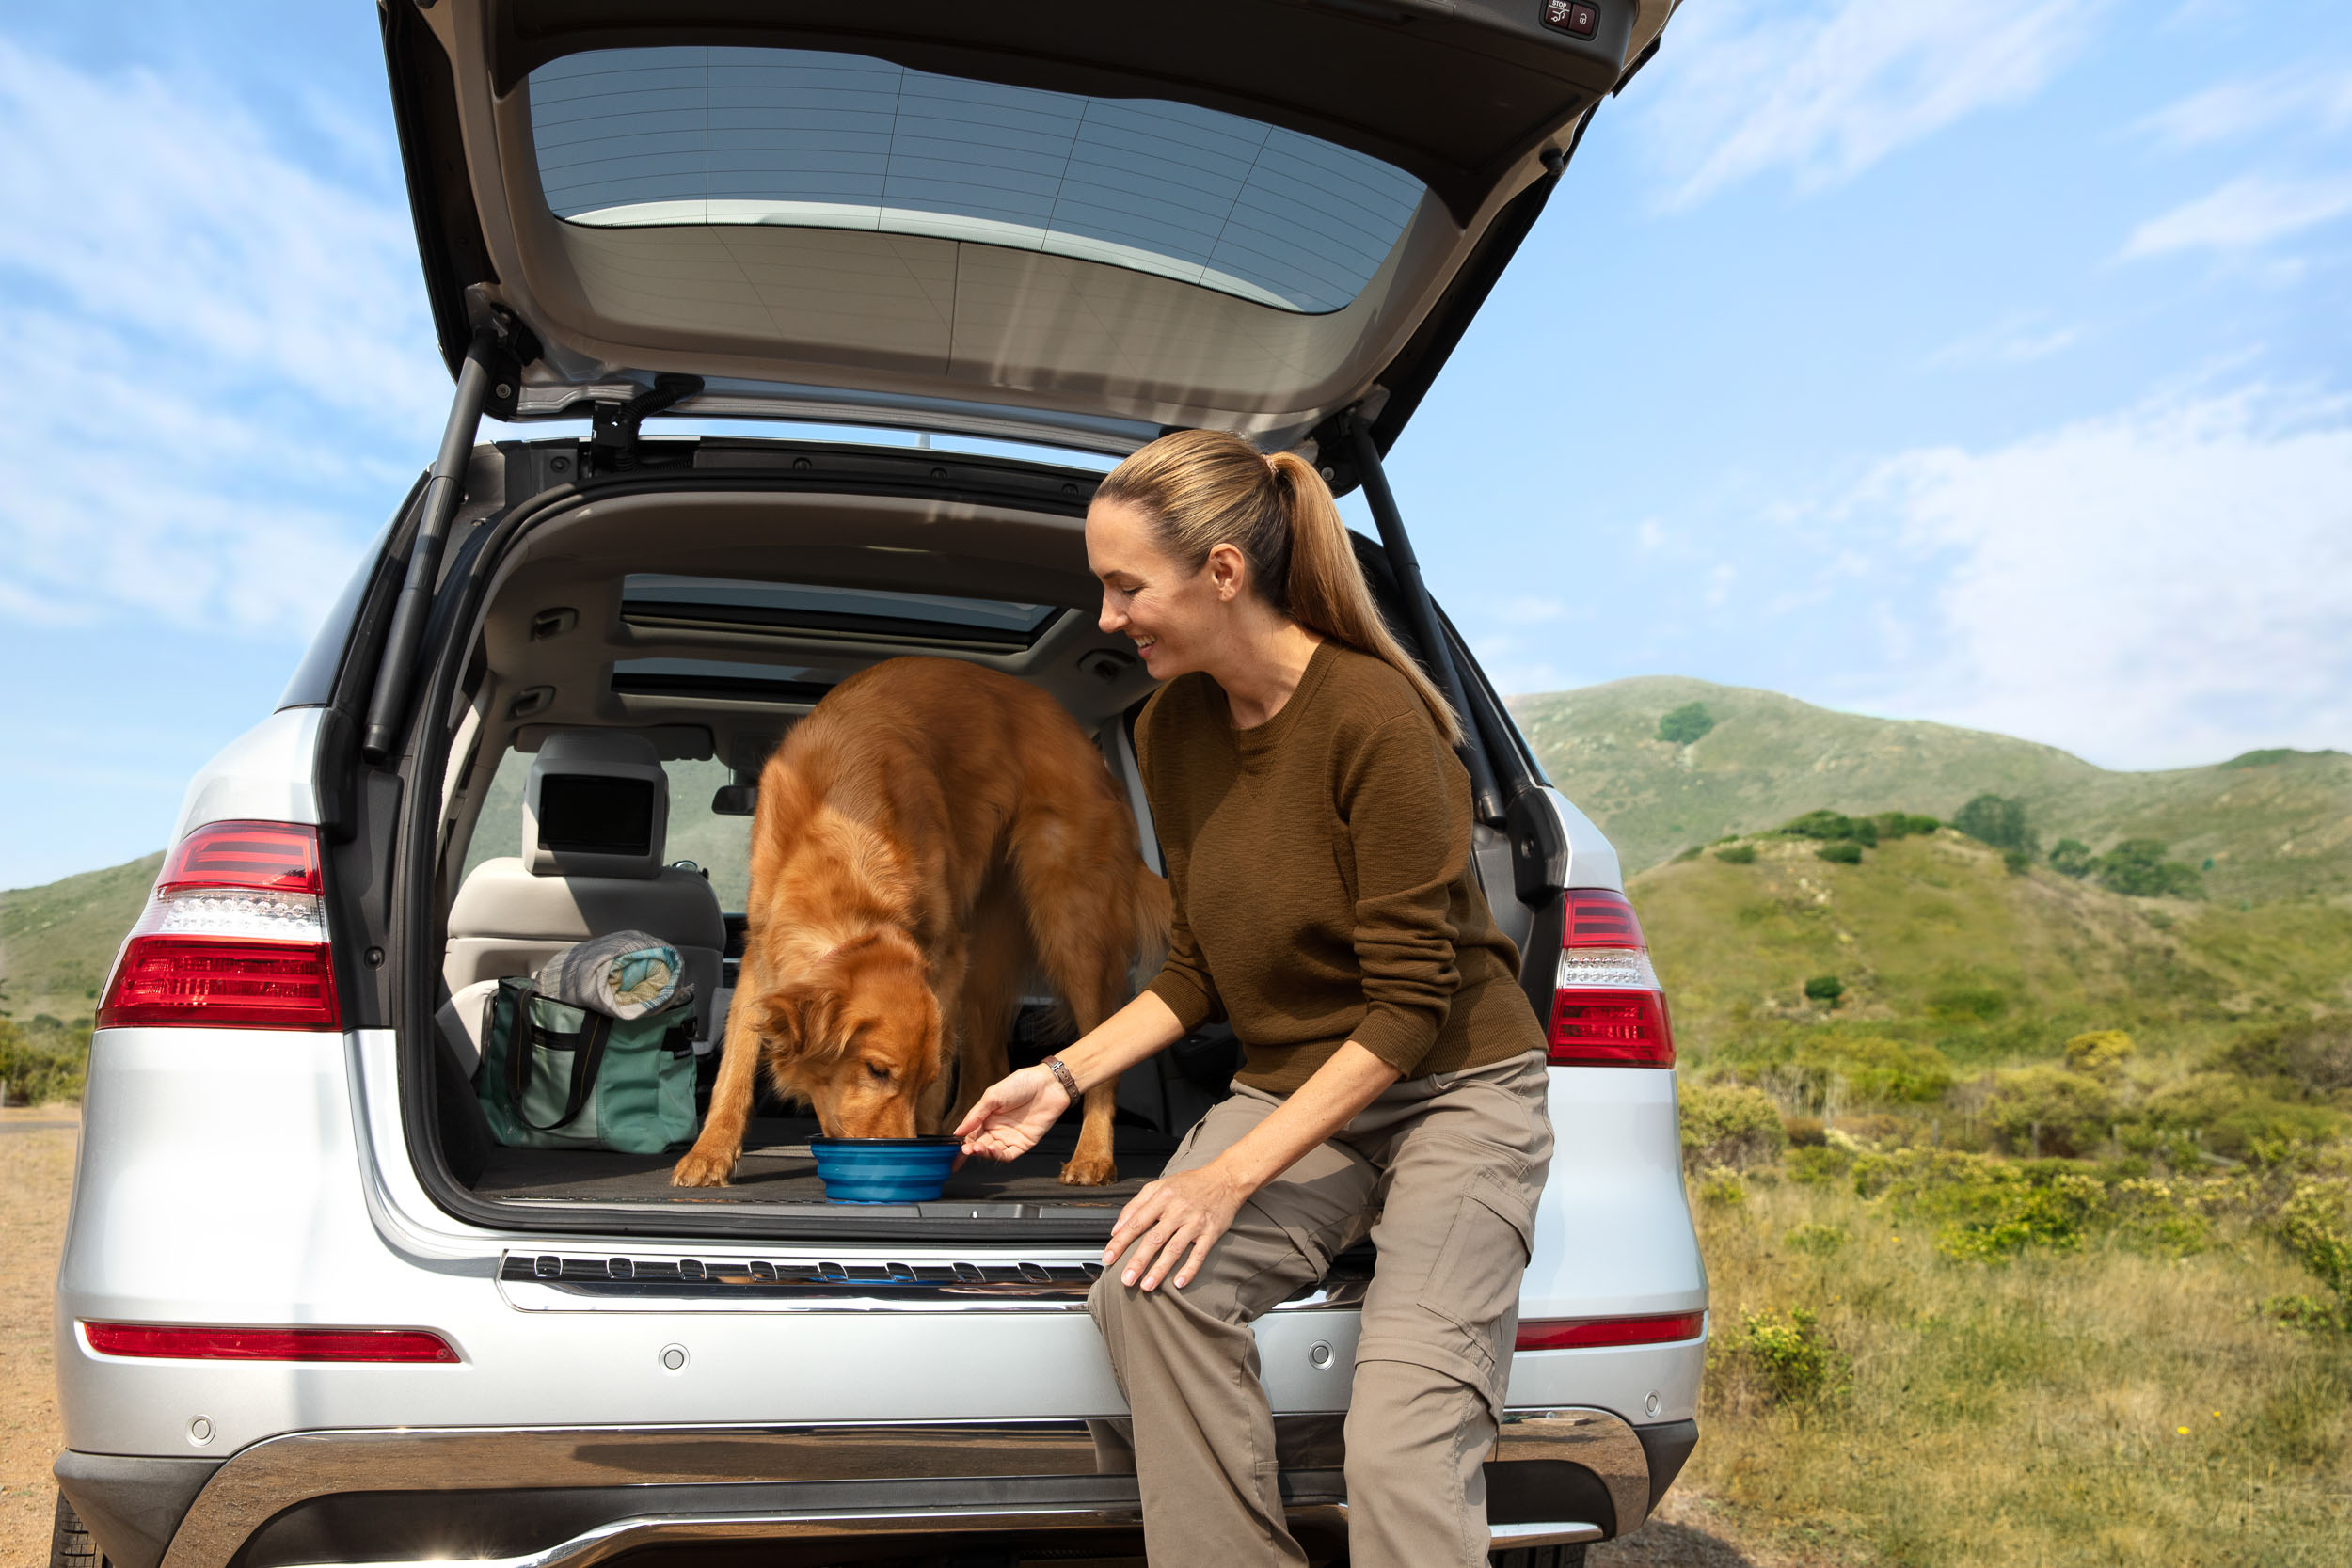 Dog and People Photography | Woman Feeding Dog in SUV by Mark Rogers